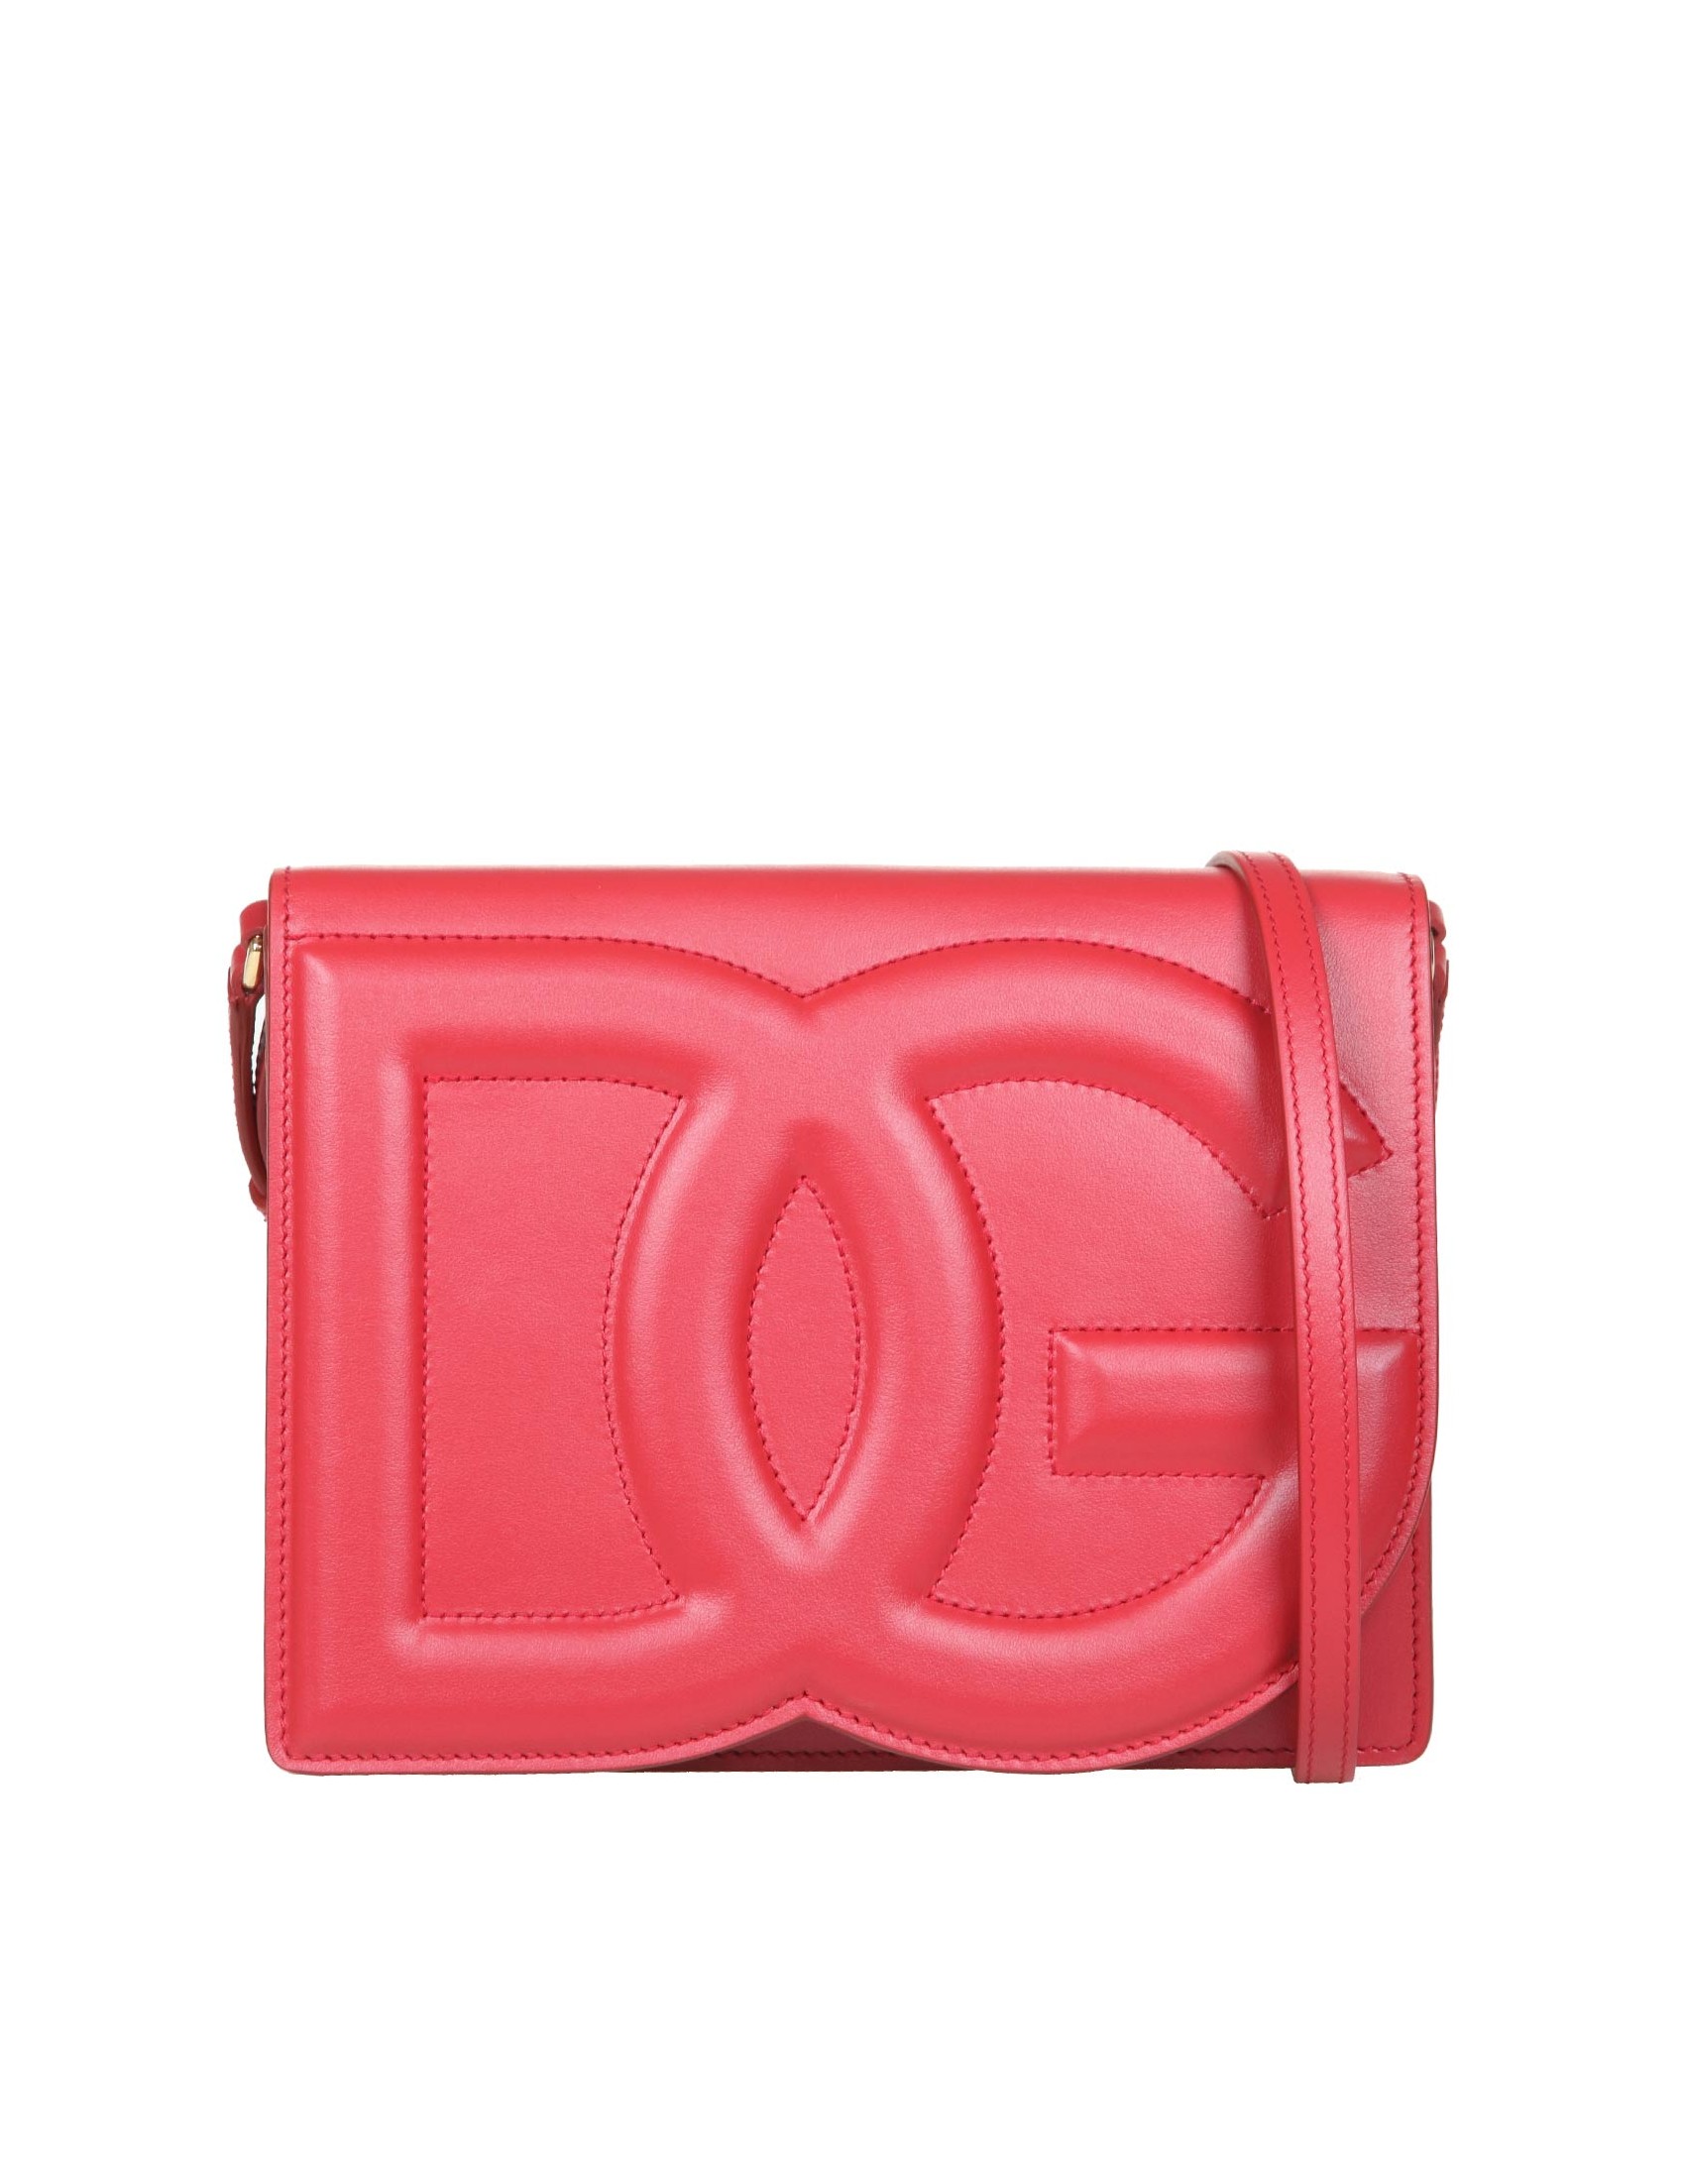 DOLCE & GABBANA CROSSBODY BAG IN LEATHER WITH LOGO